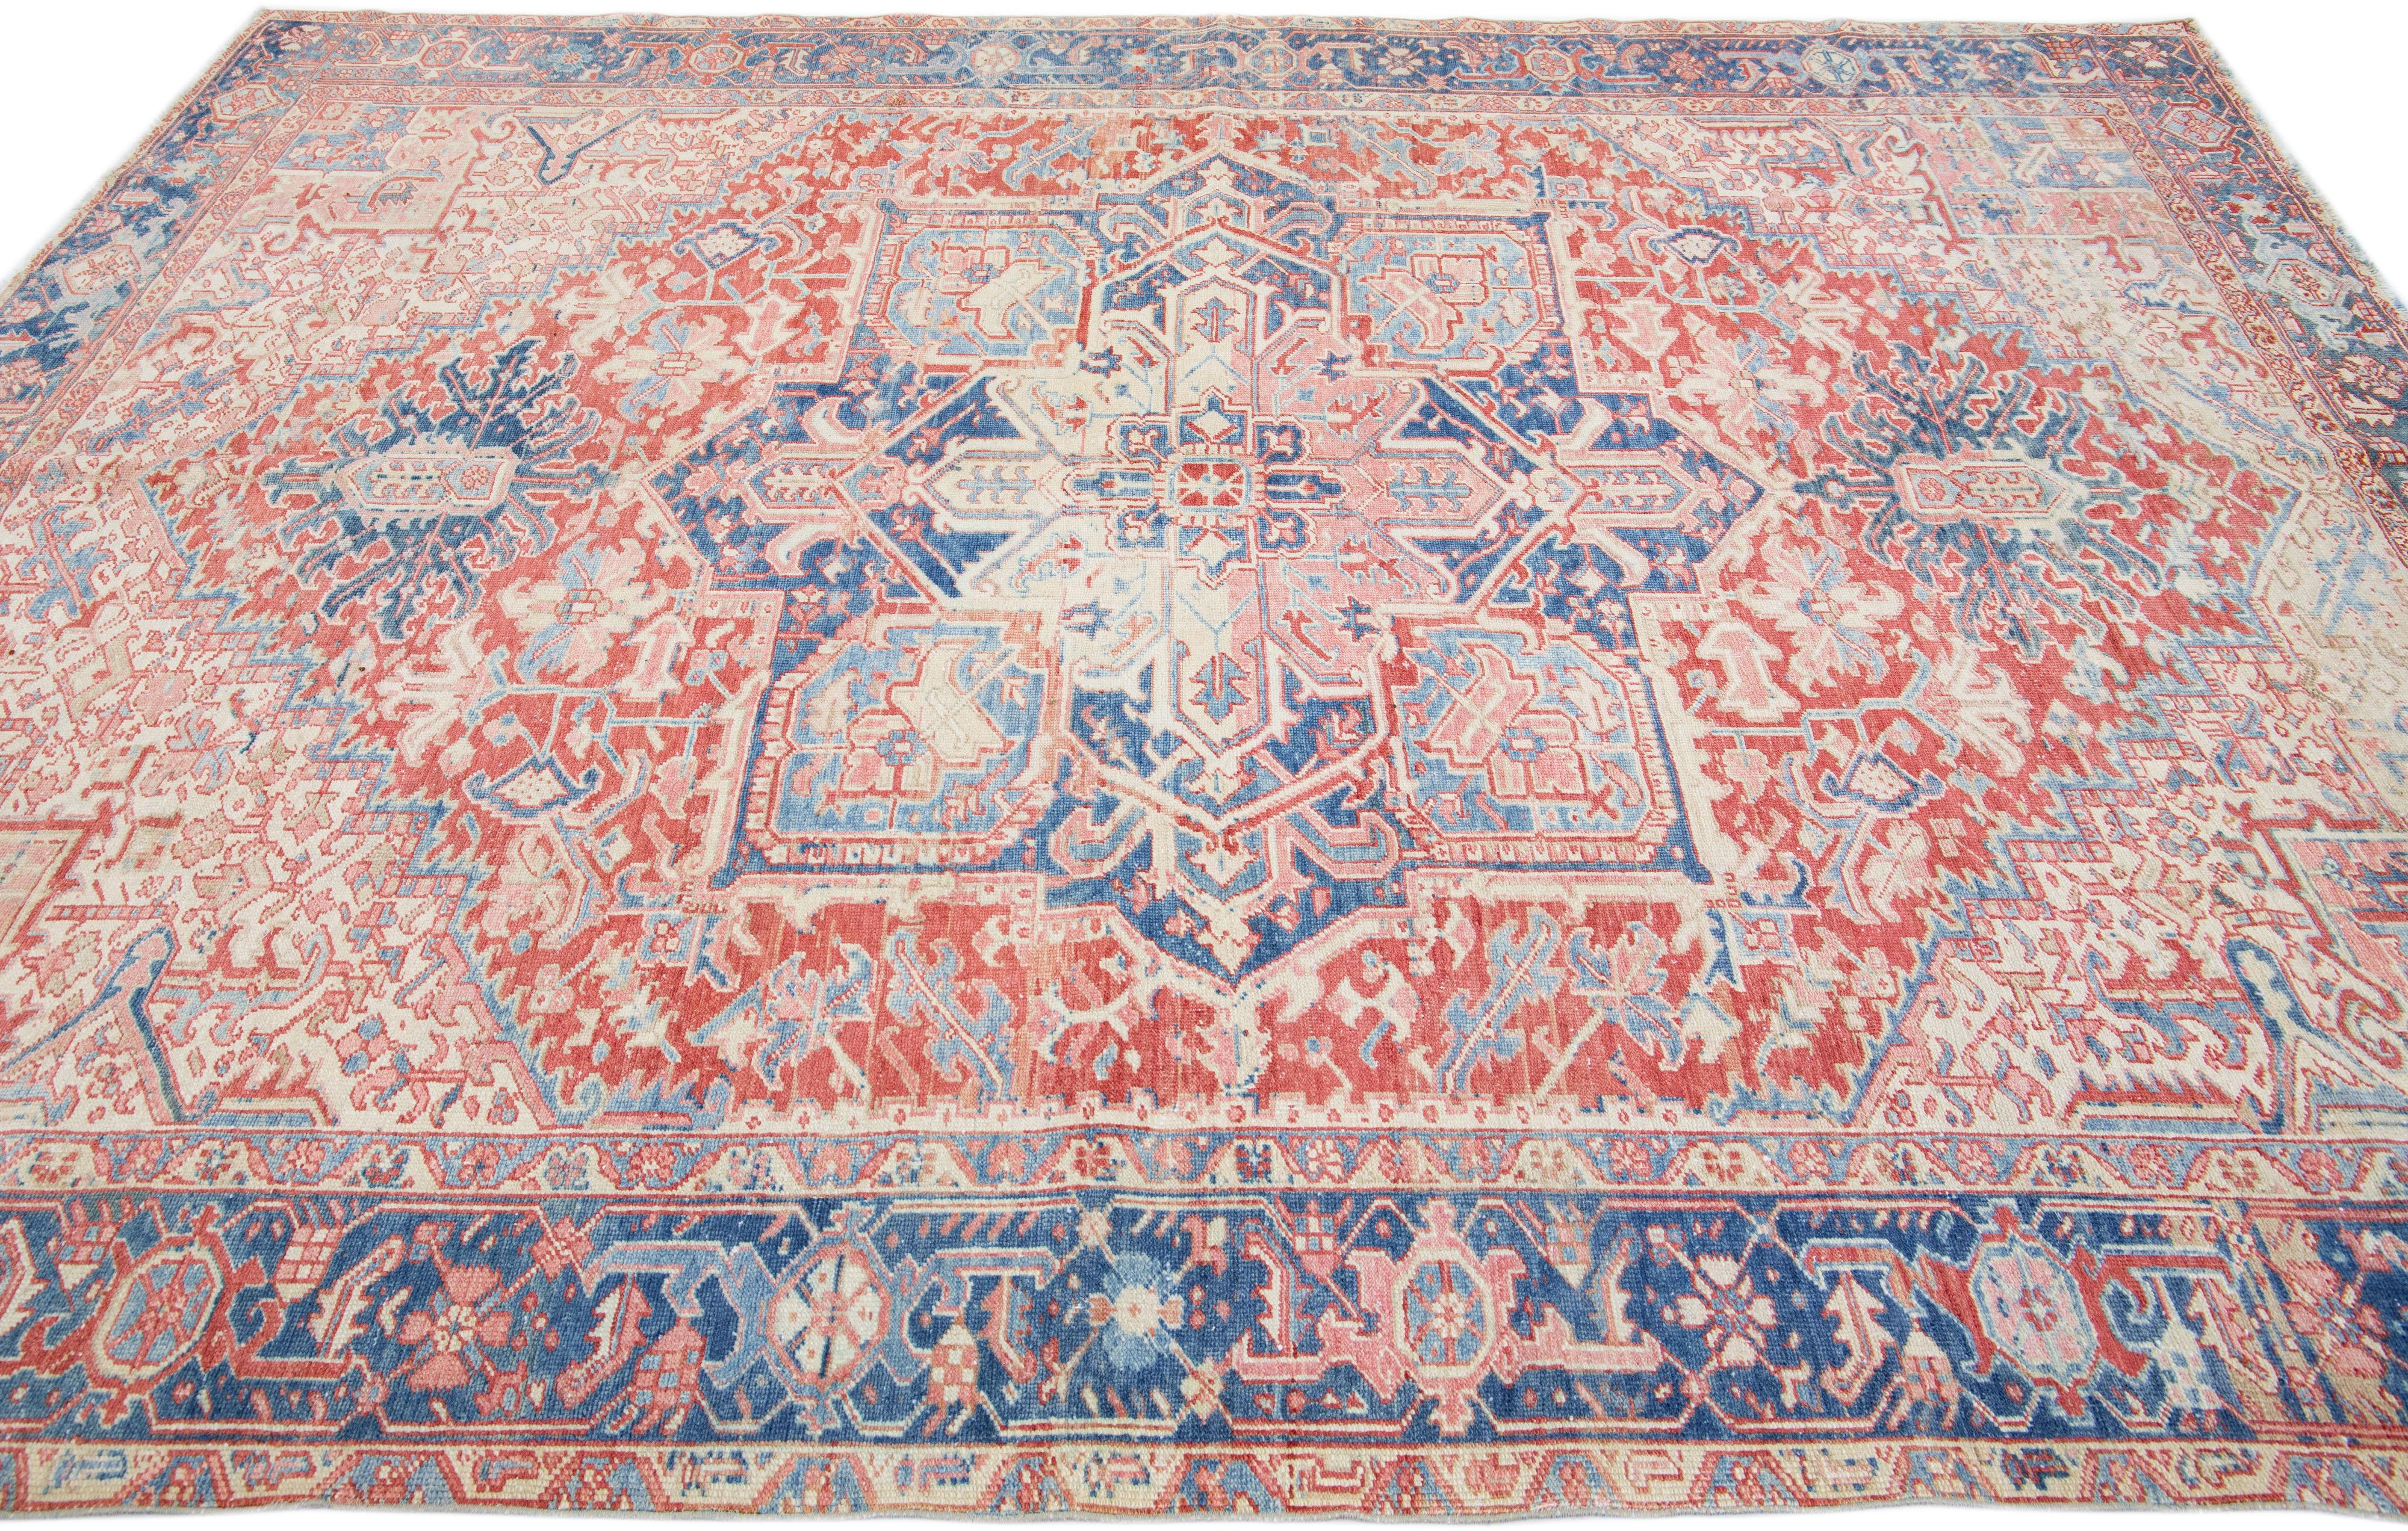 Antique Persian Heriz Pink Handmade Room Size Wool Rug with Medallion Design In Good Condition For Sale In Norwalk, CT